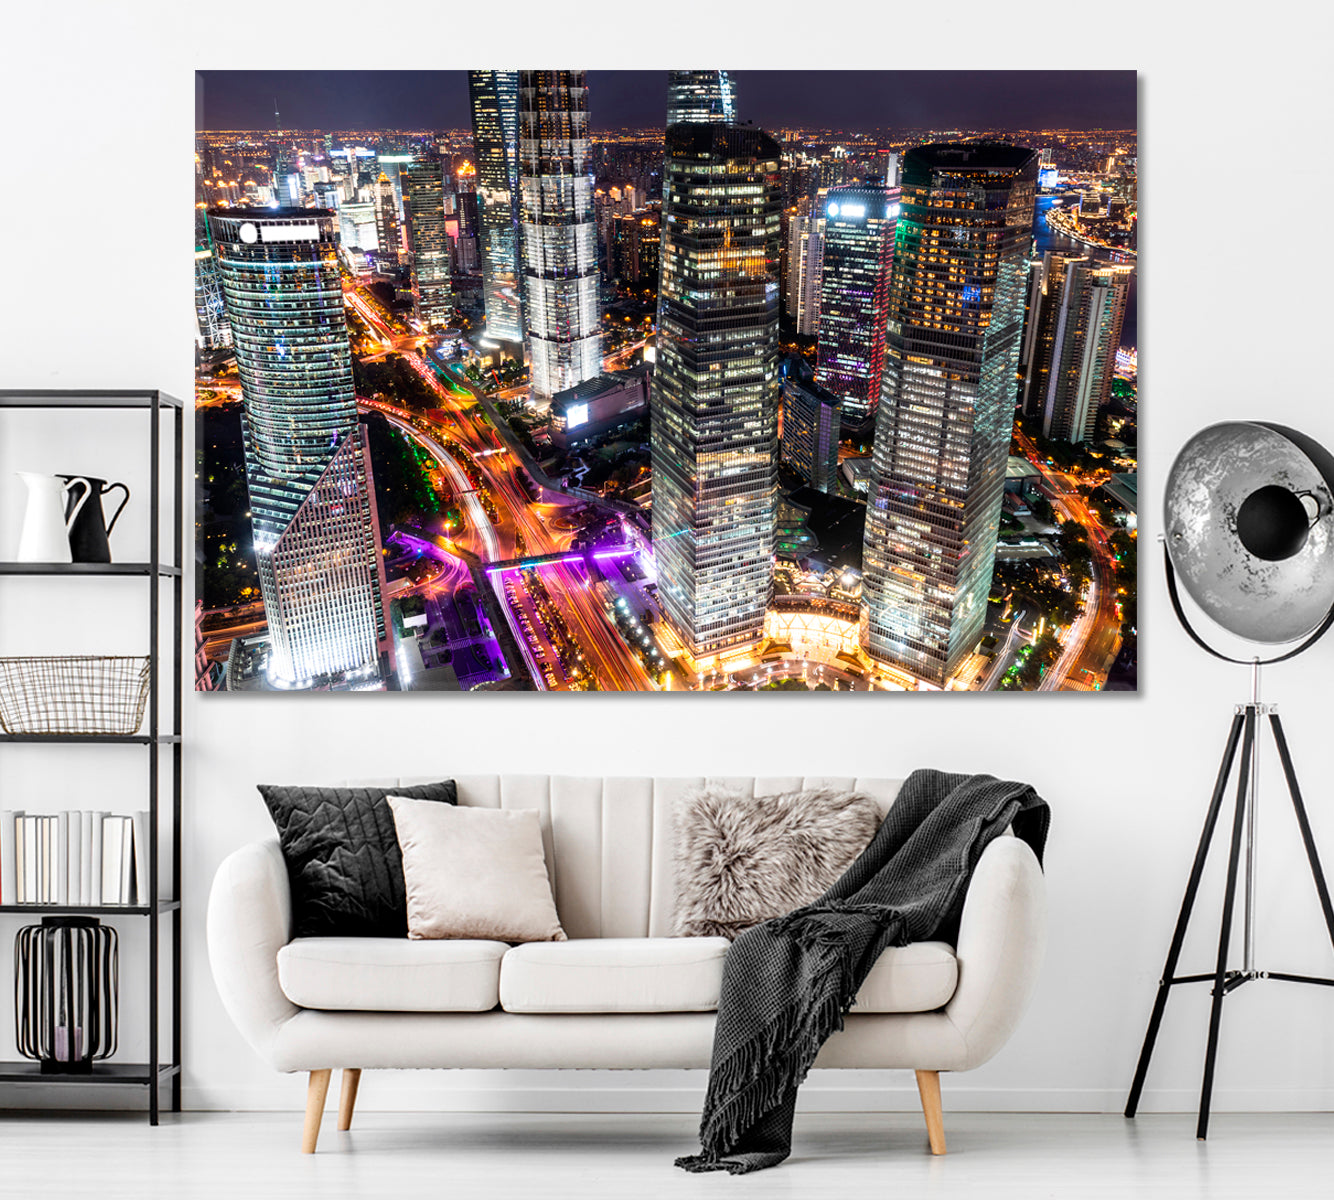 Modern City at Night in Shanghai Canvas Print ArtLexy 1 Panel 24"x16" inches 